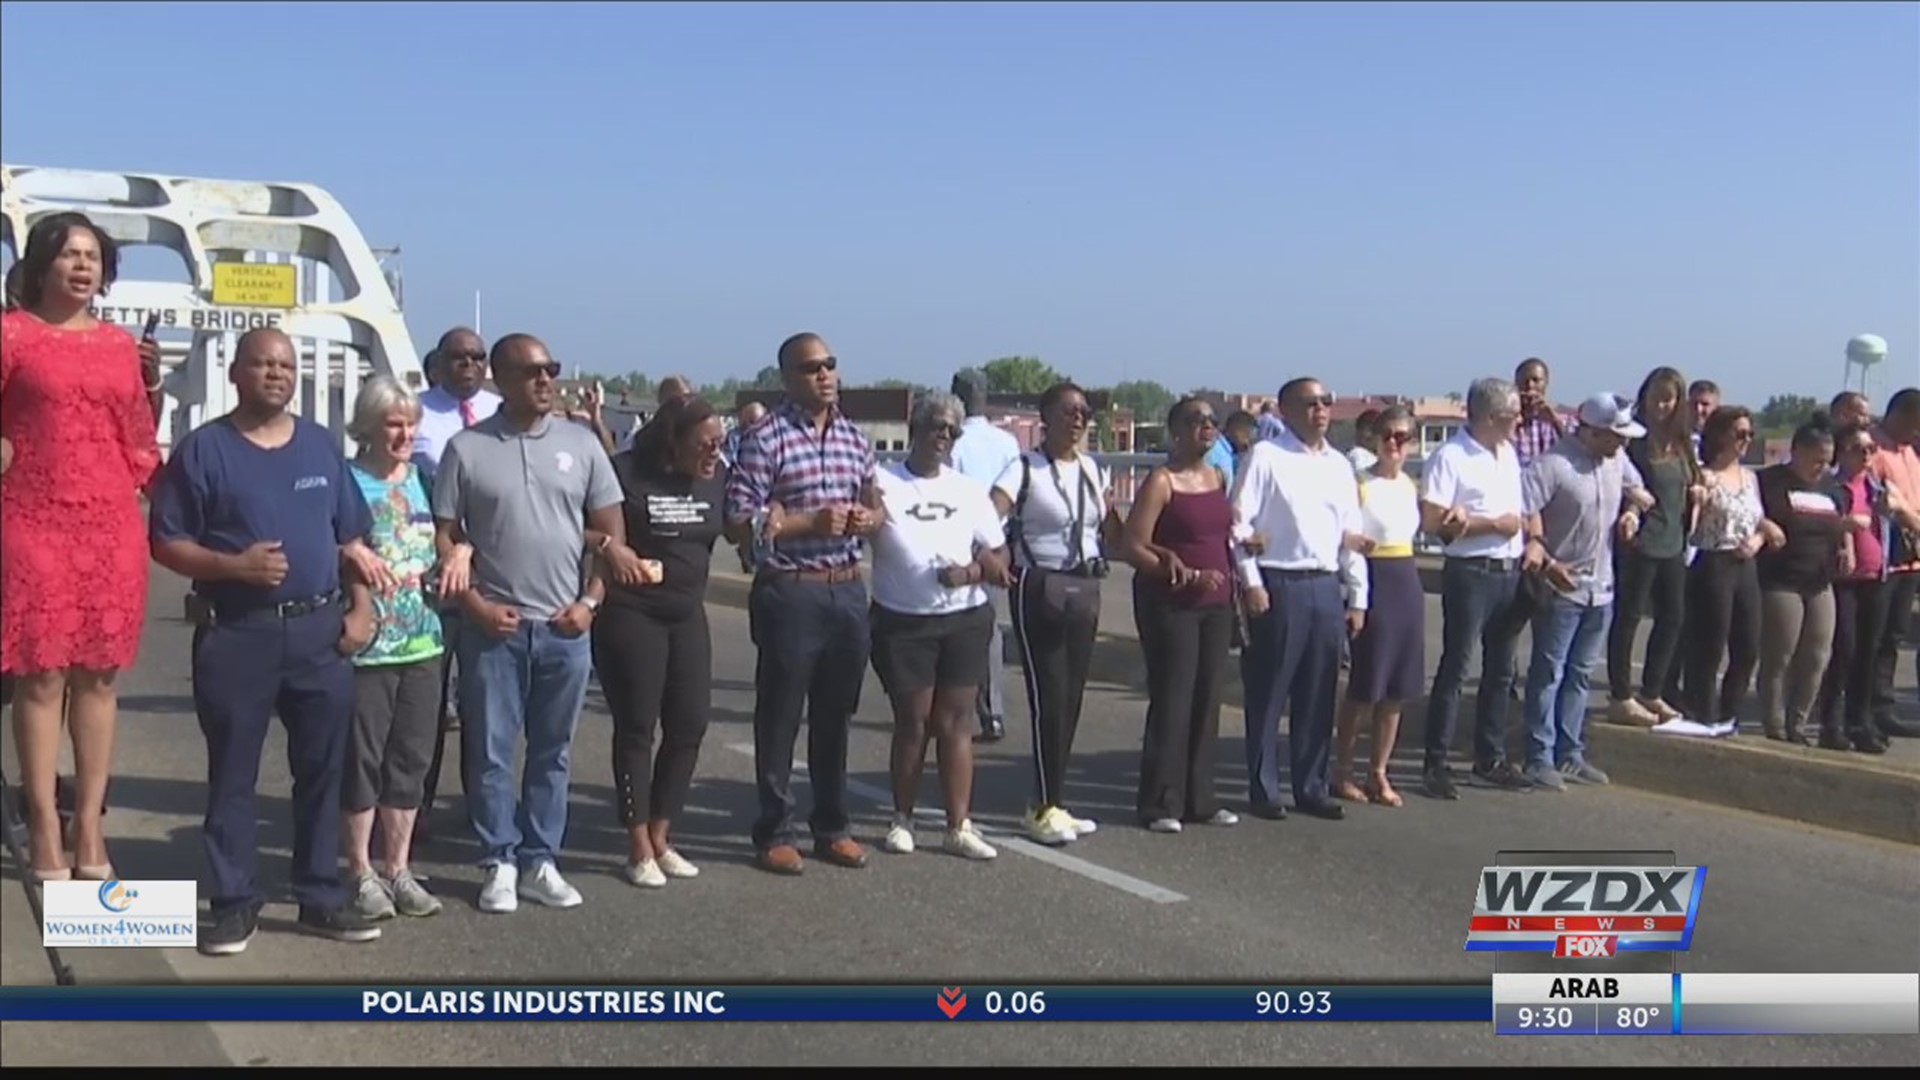 On Monday, dozens of prosecutors from across the country marched across the Edmund Pettus Bridge in Selma to bring awareness to unjust prosecutions.